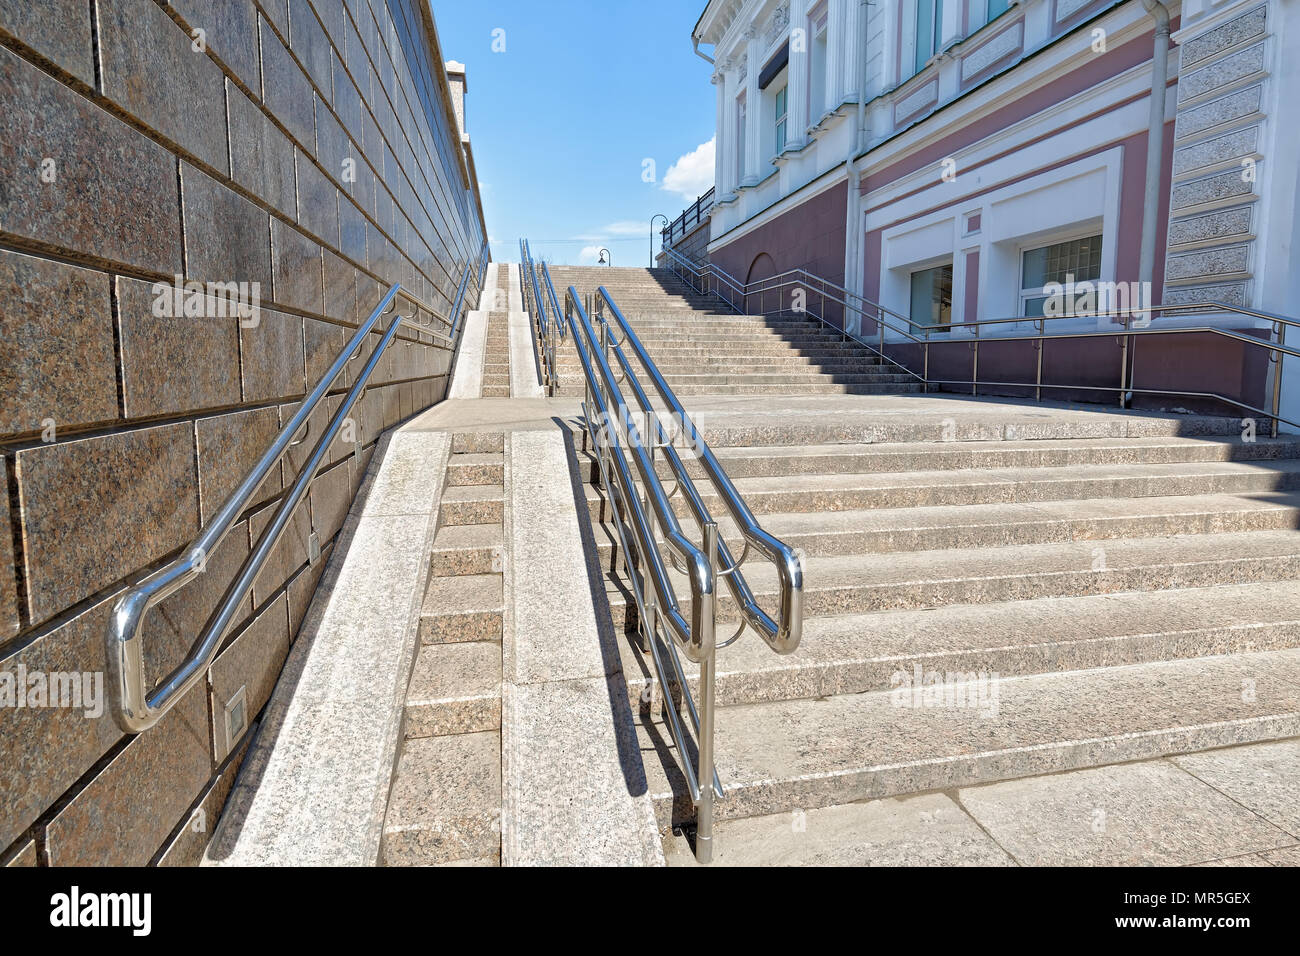 Omsk, Russia. A large steep ramp for wheelchairs as part of a staircase in the central part of the city Stock Photo